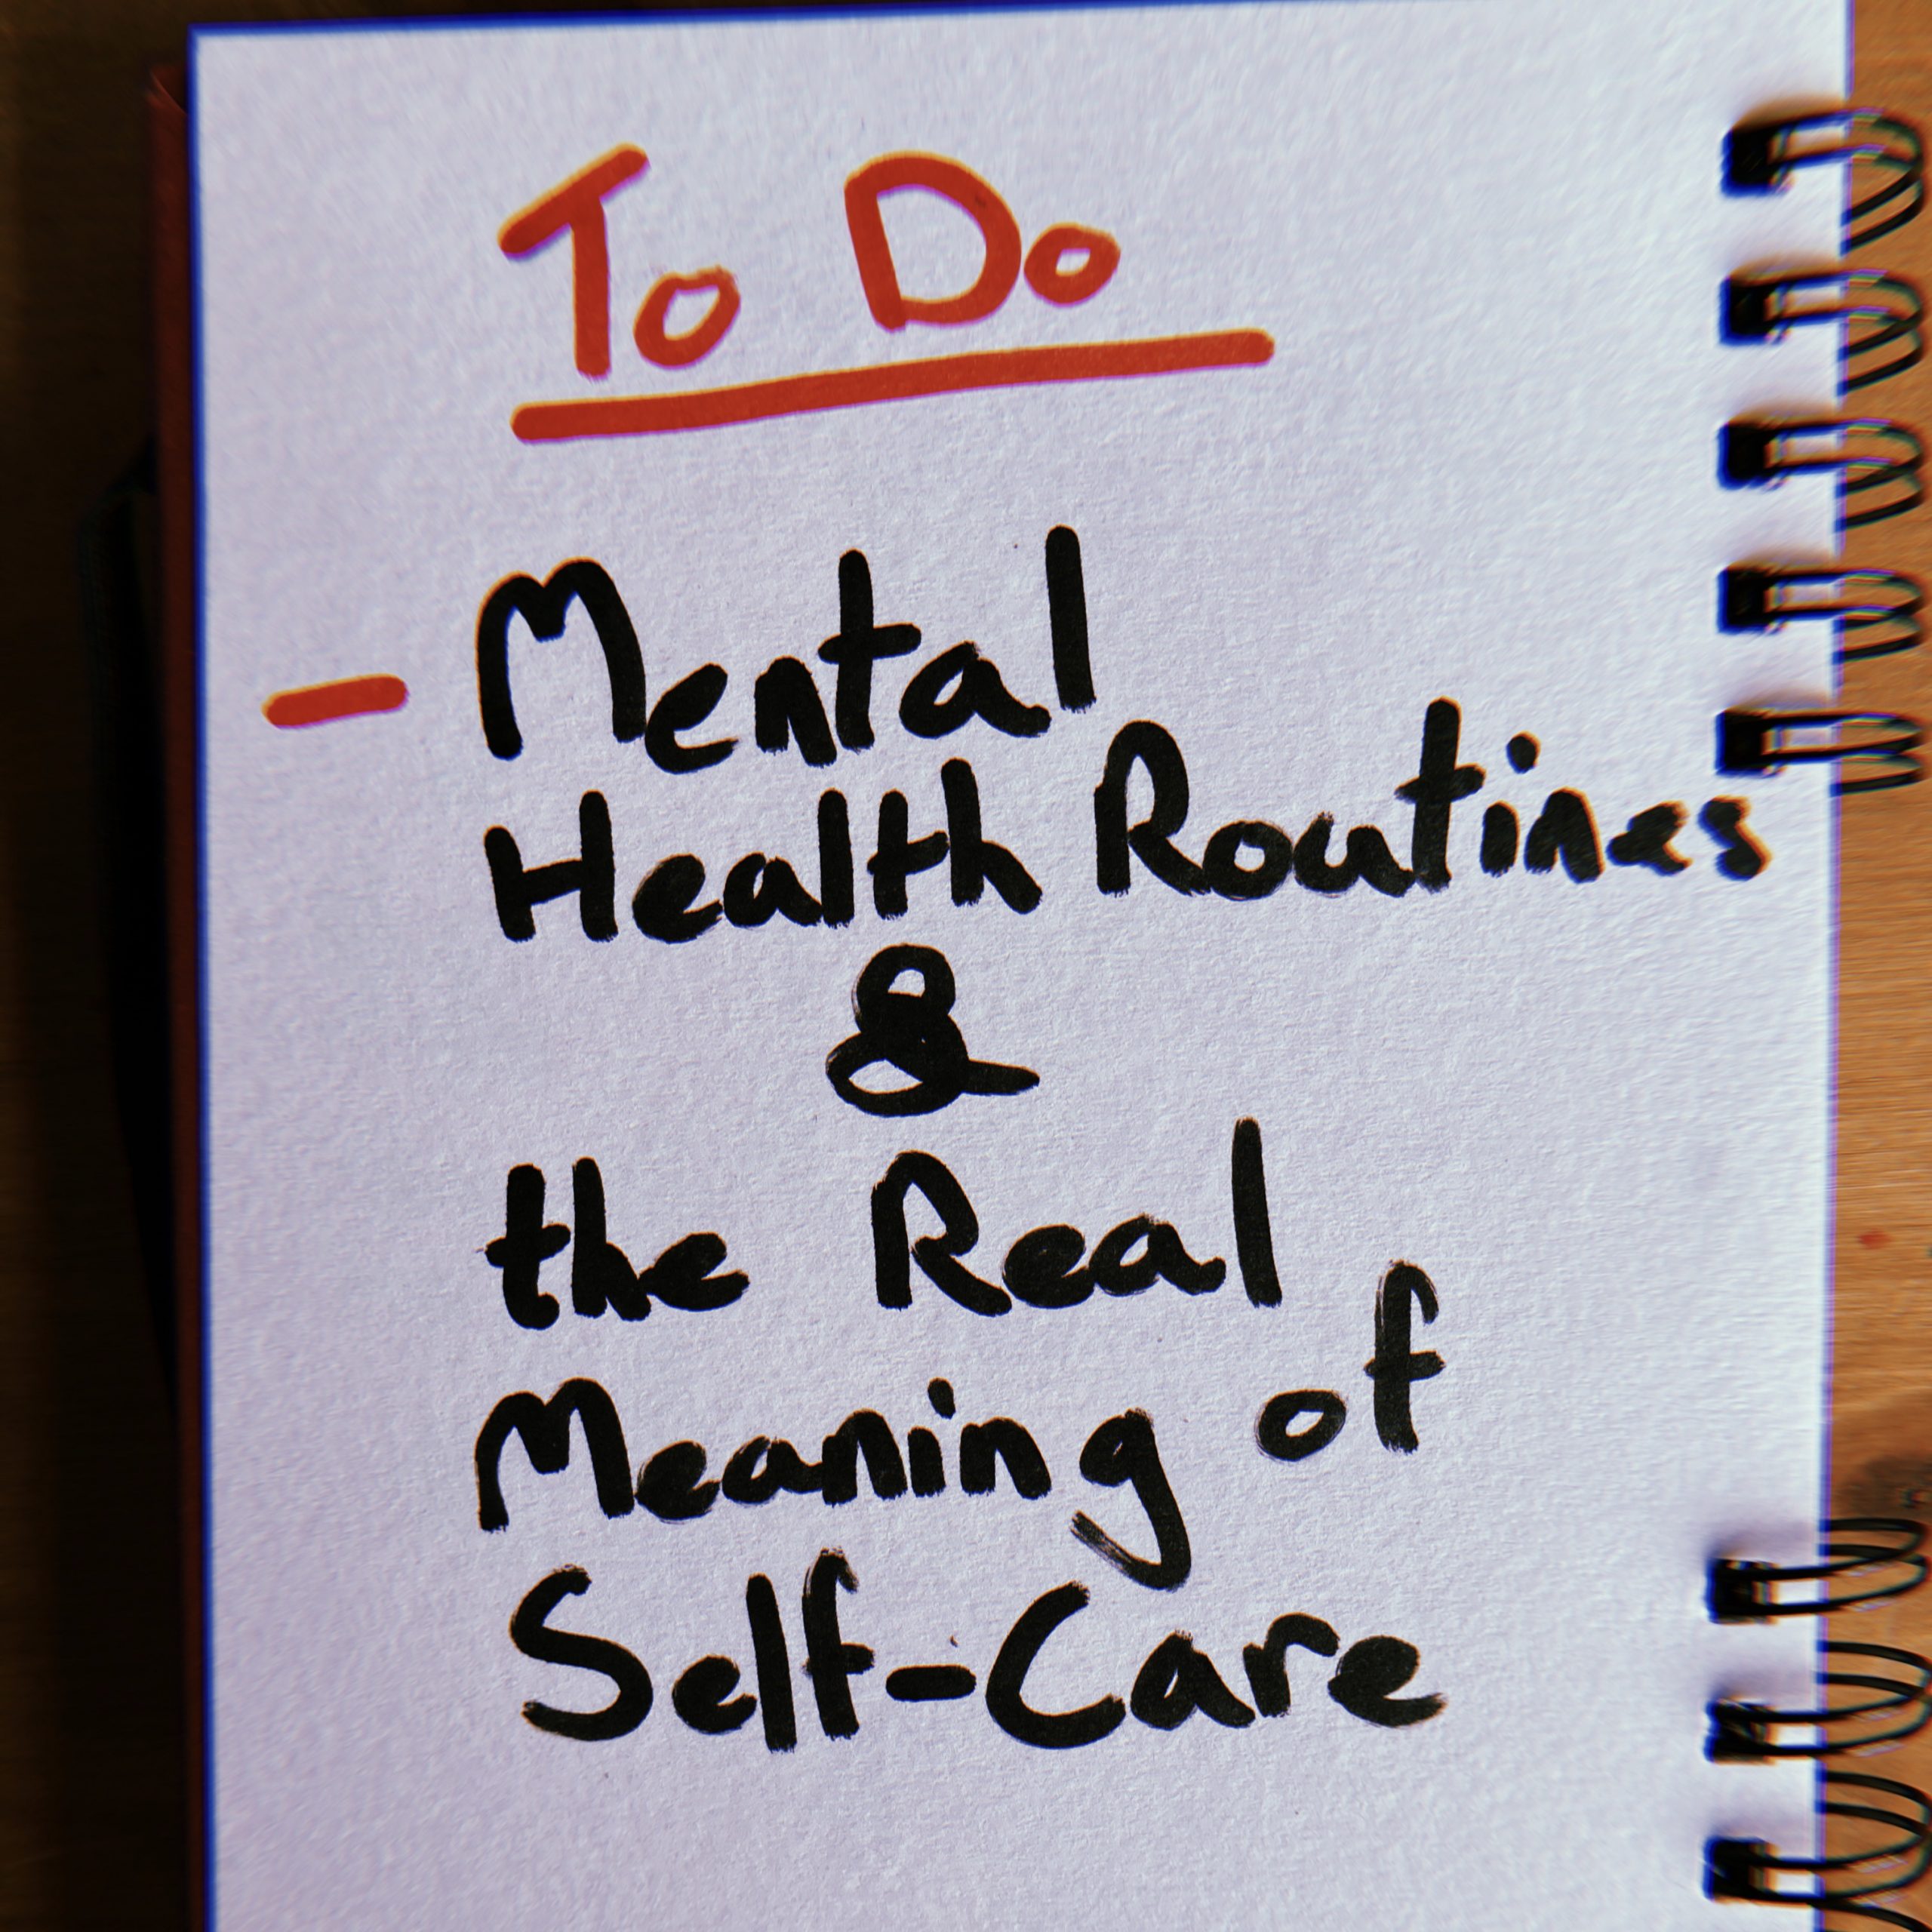 Mental Health Routines and the Real Meaning of Self-Care